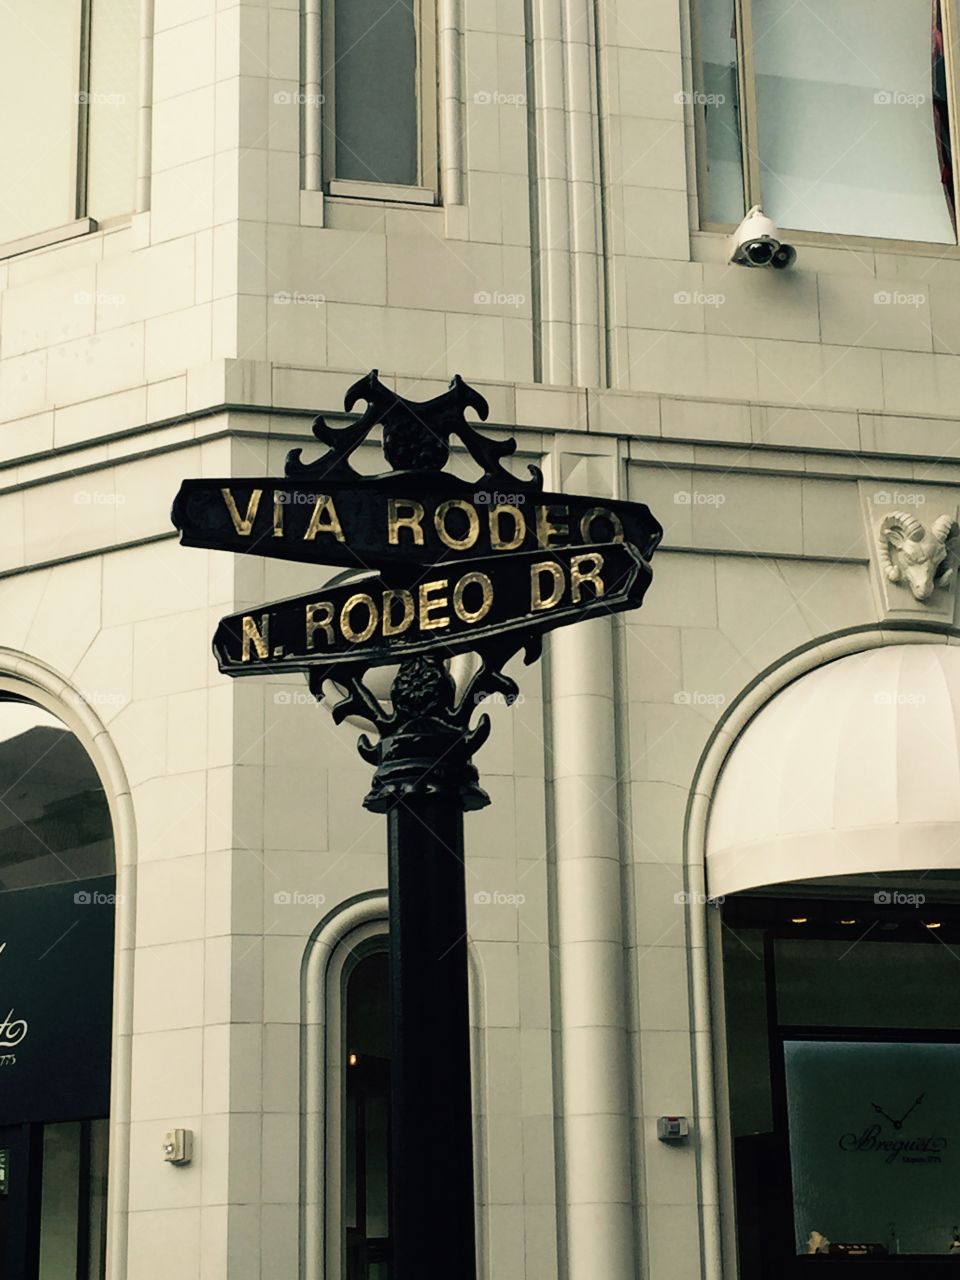 Rodeo drive 